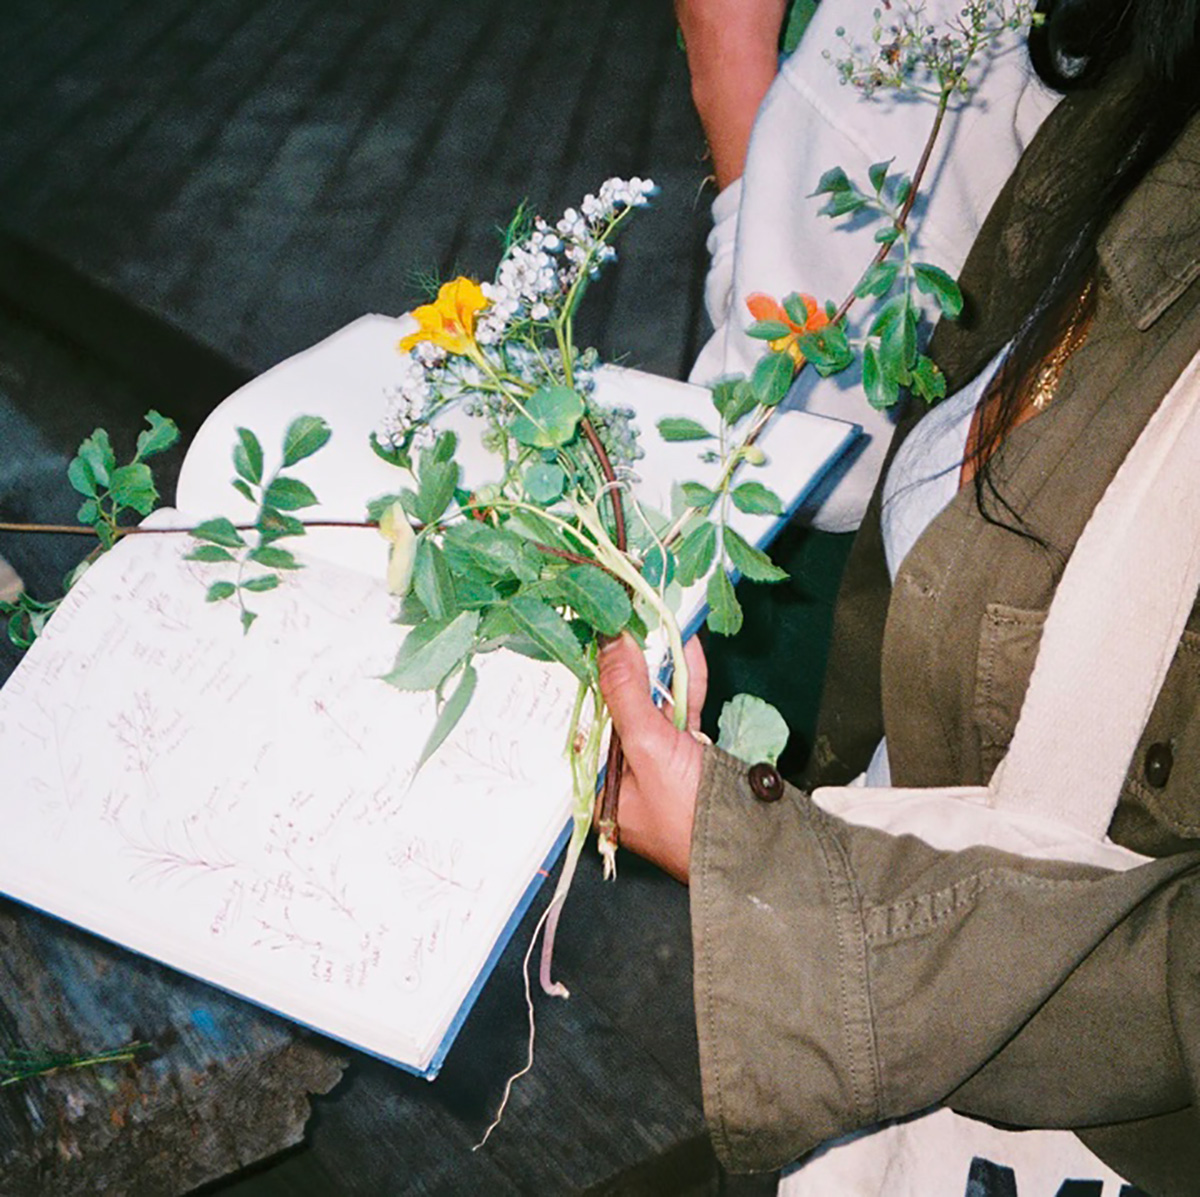 a film photograph of wild flowers held over a notebook containing notes on wild plants.